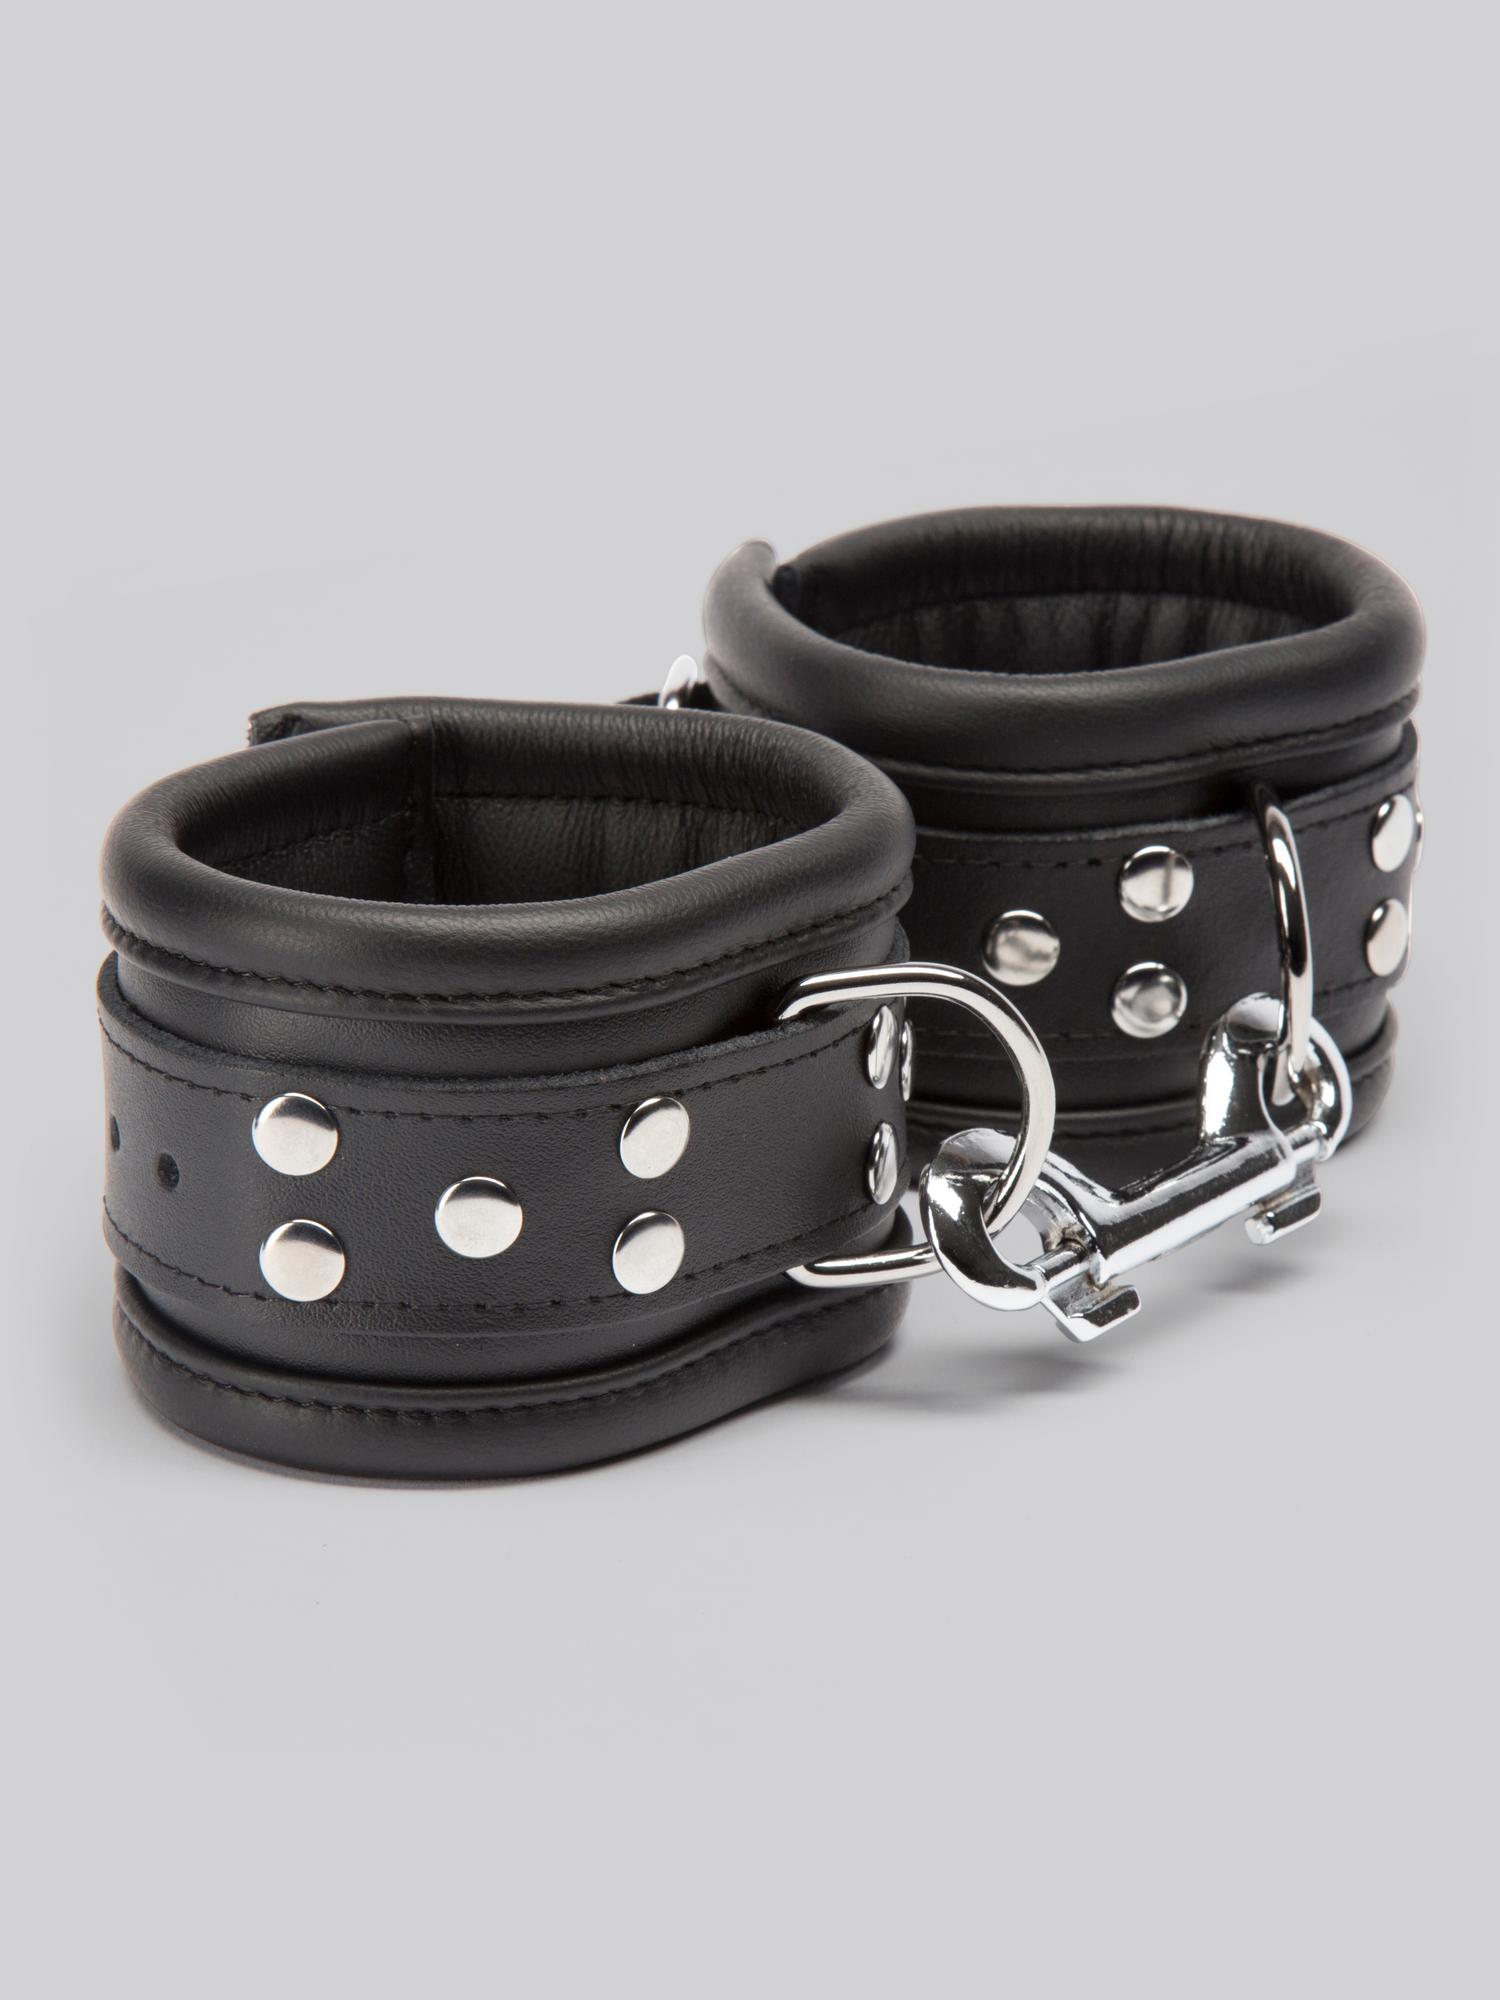 Dominix Deluxe Heavy Leather Ankle Cuffs. Slide 3